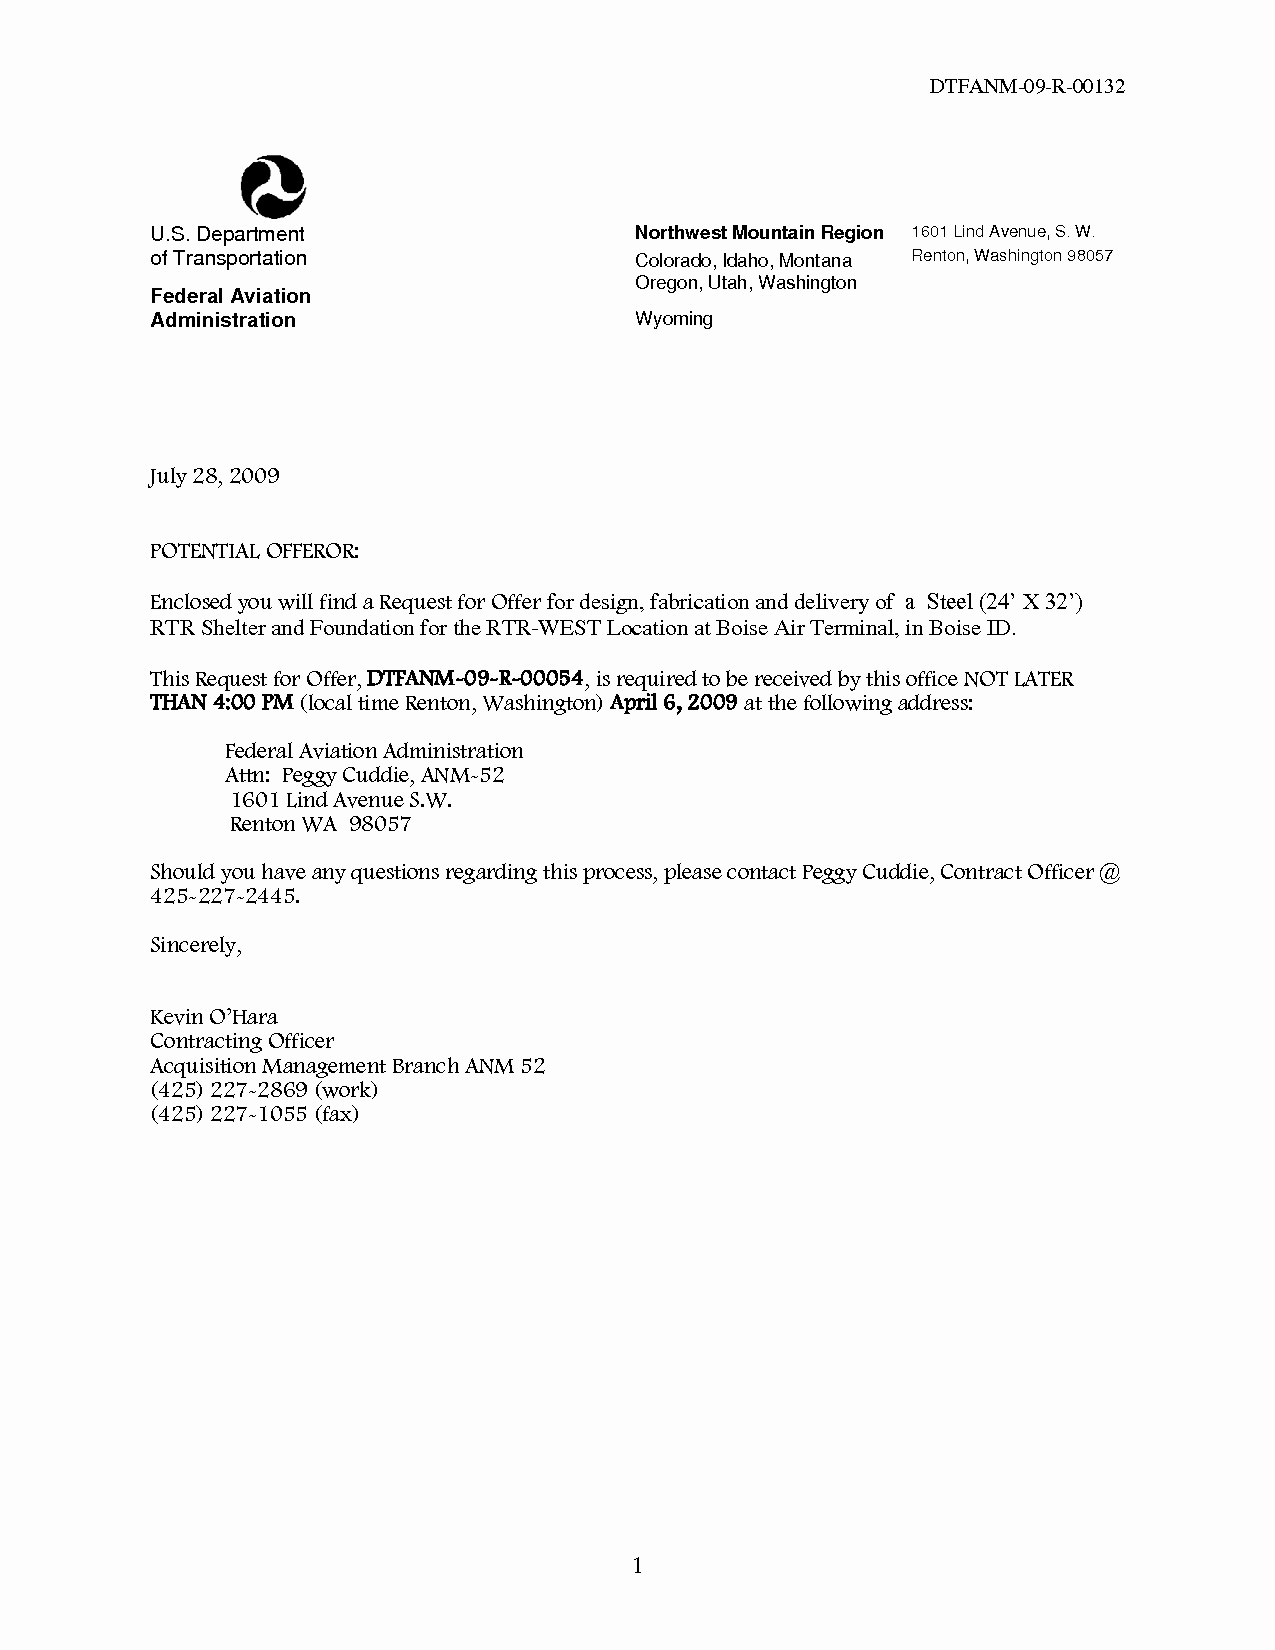 Letter Of Recommendation Employment Template Luxury Bank Reference Letter Template Mughals